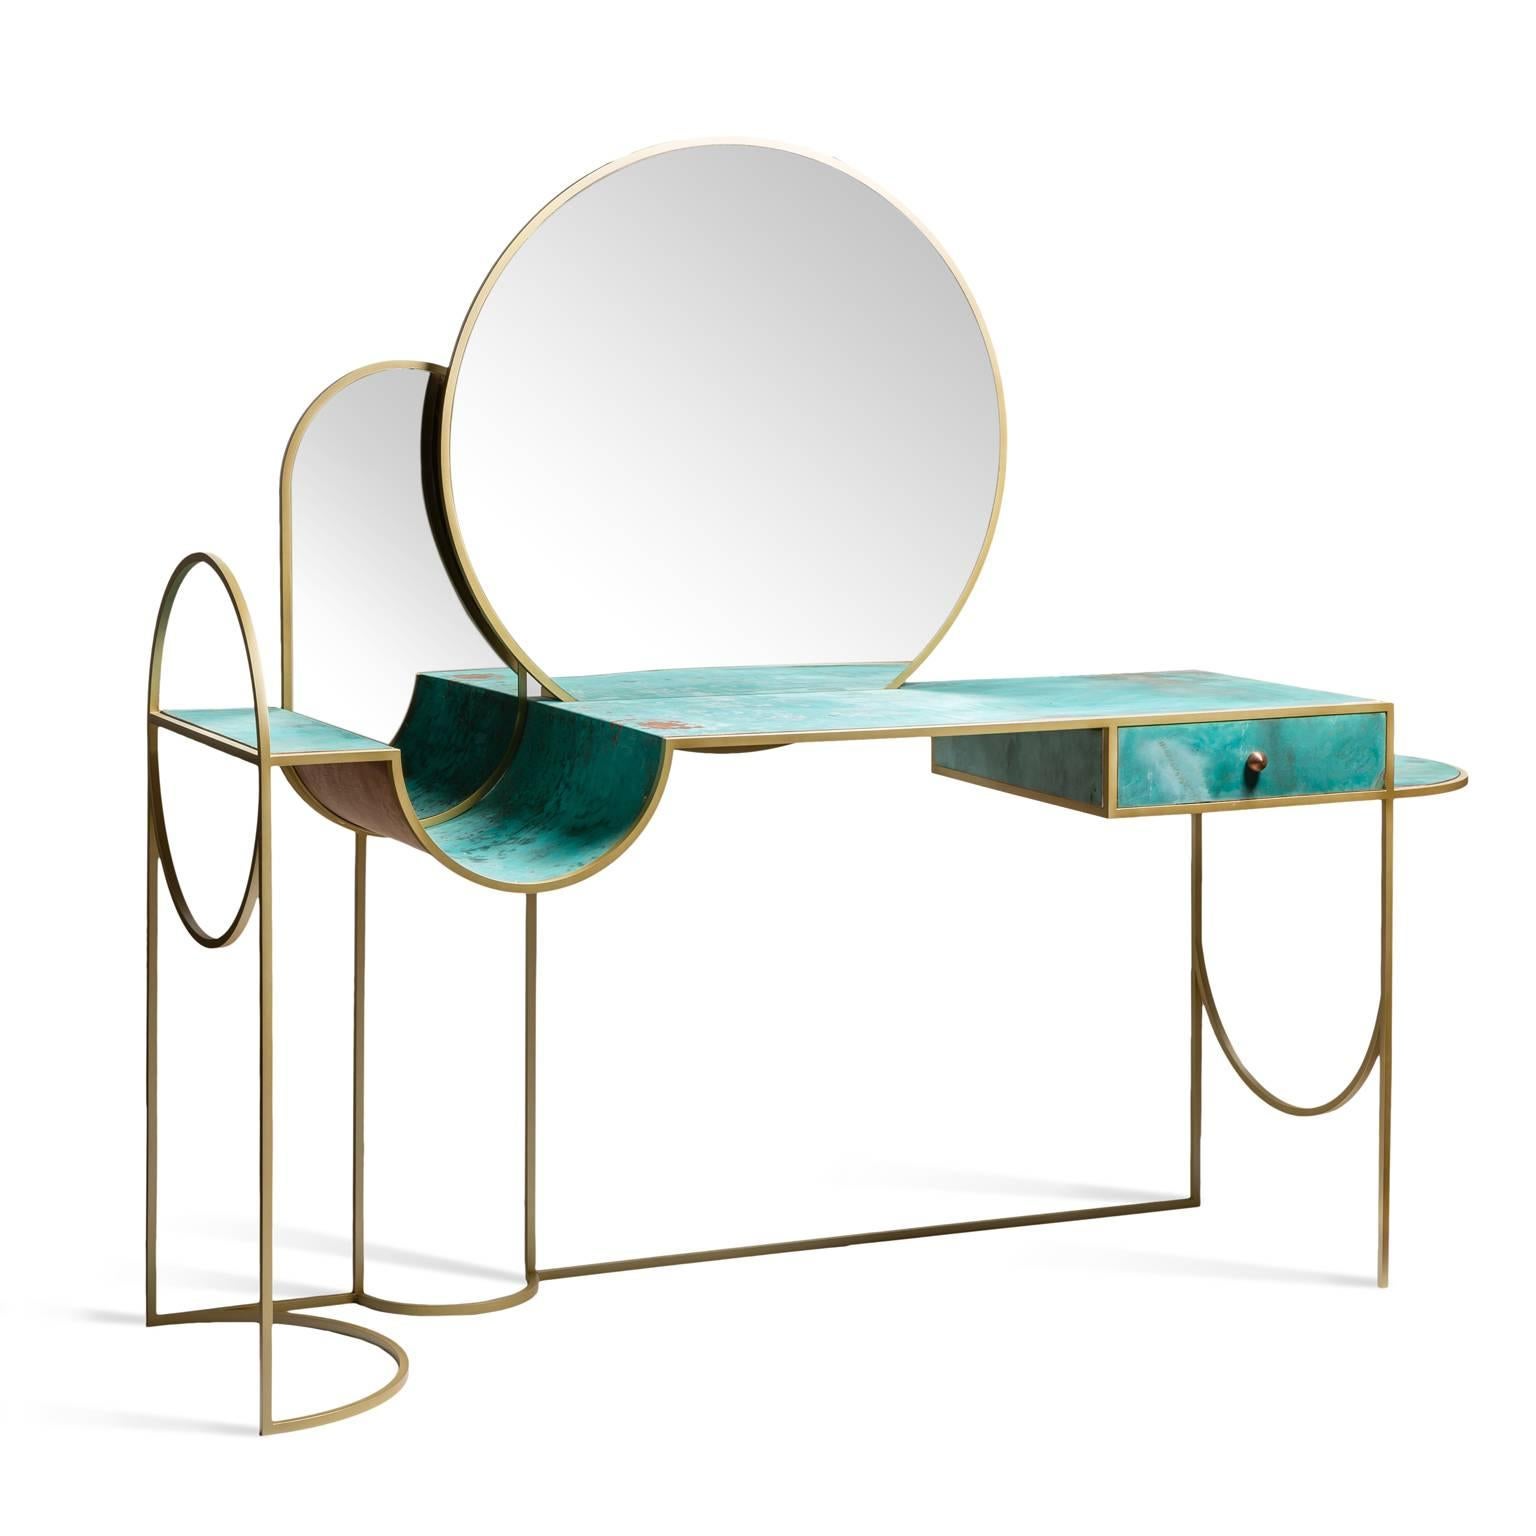 Lara Bohinc draws on her experience in metalwork with the Celeste Console.

This piece has an elegant and playful form made from square brass covered steel rod frame, that contrasts with the fresh green of the verdigris patinated copper surface,